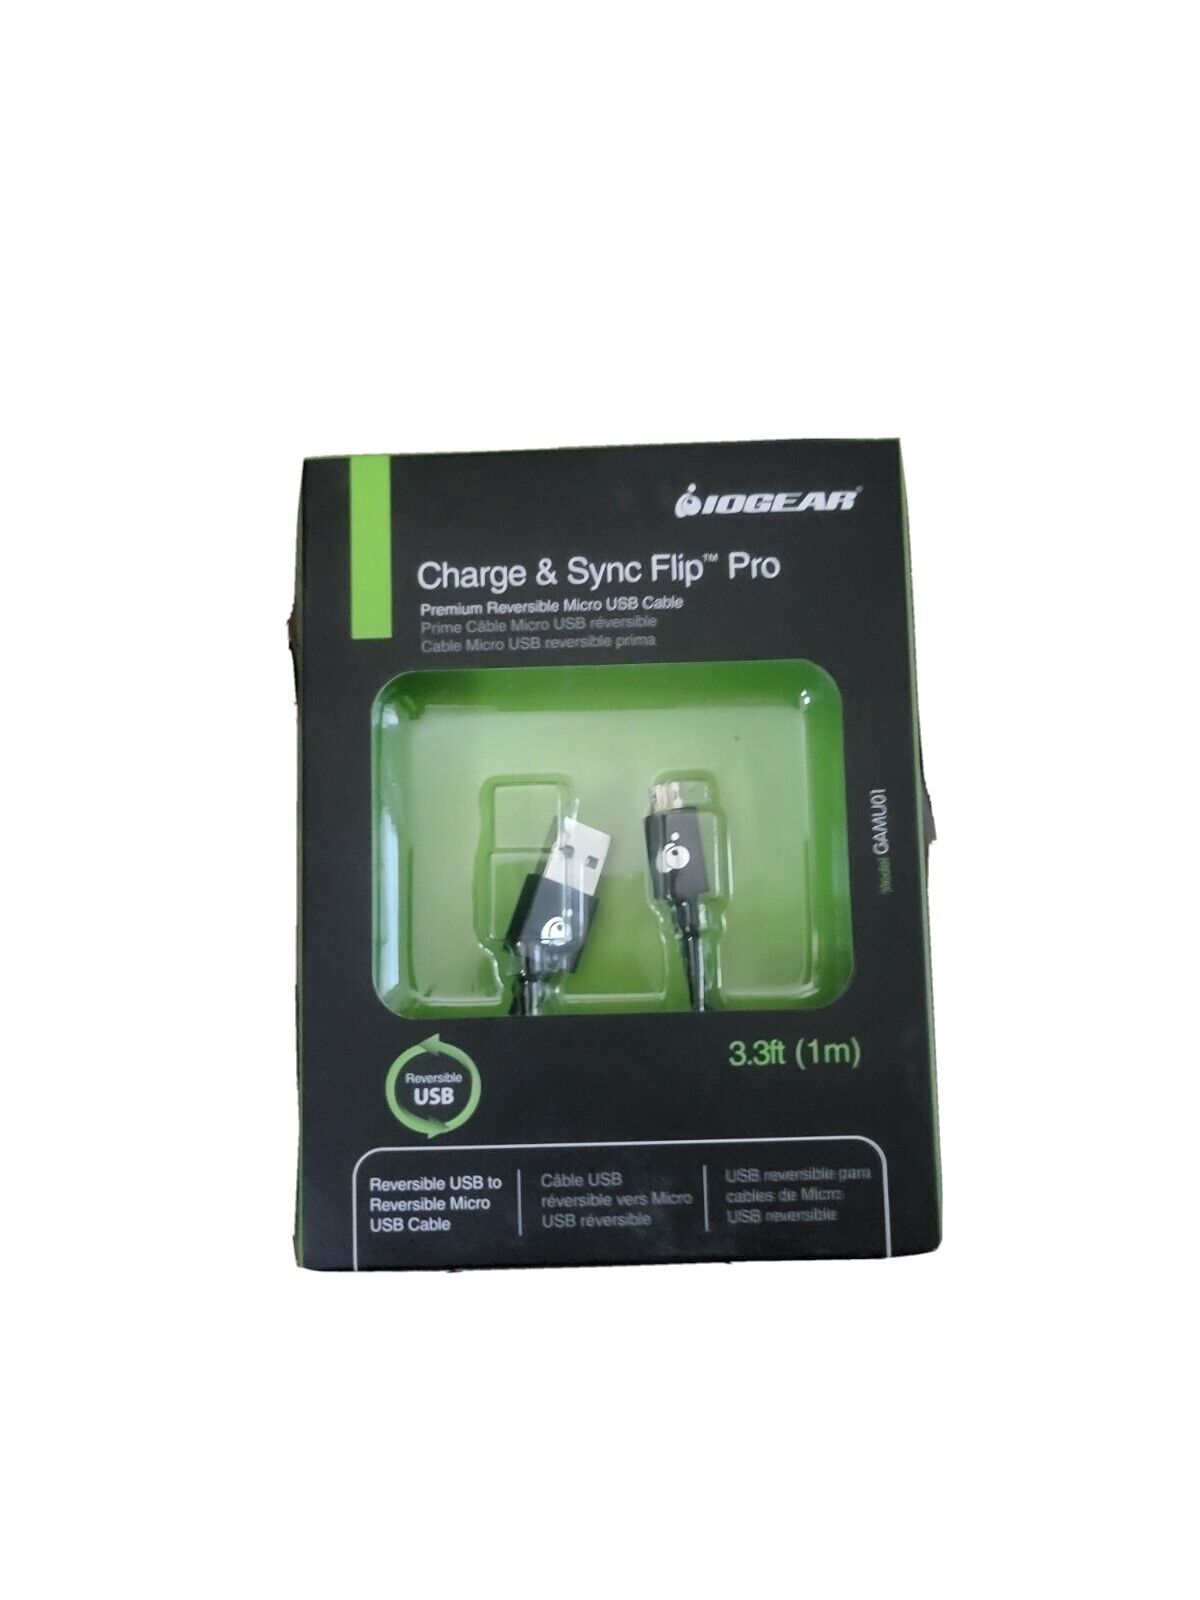 GAMU01 IOGEAR Charge and Sync Flip Pro, Reversible USB to Reversible Micro USB